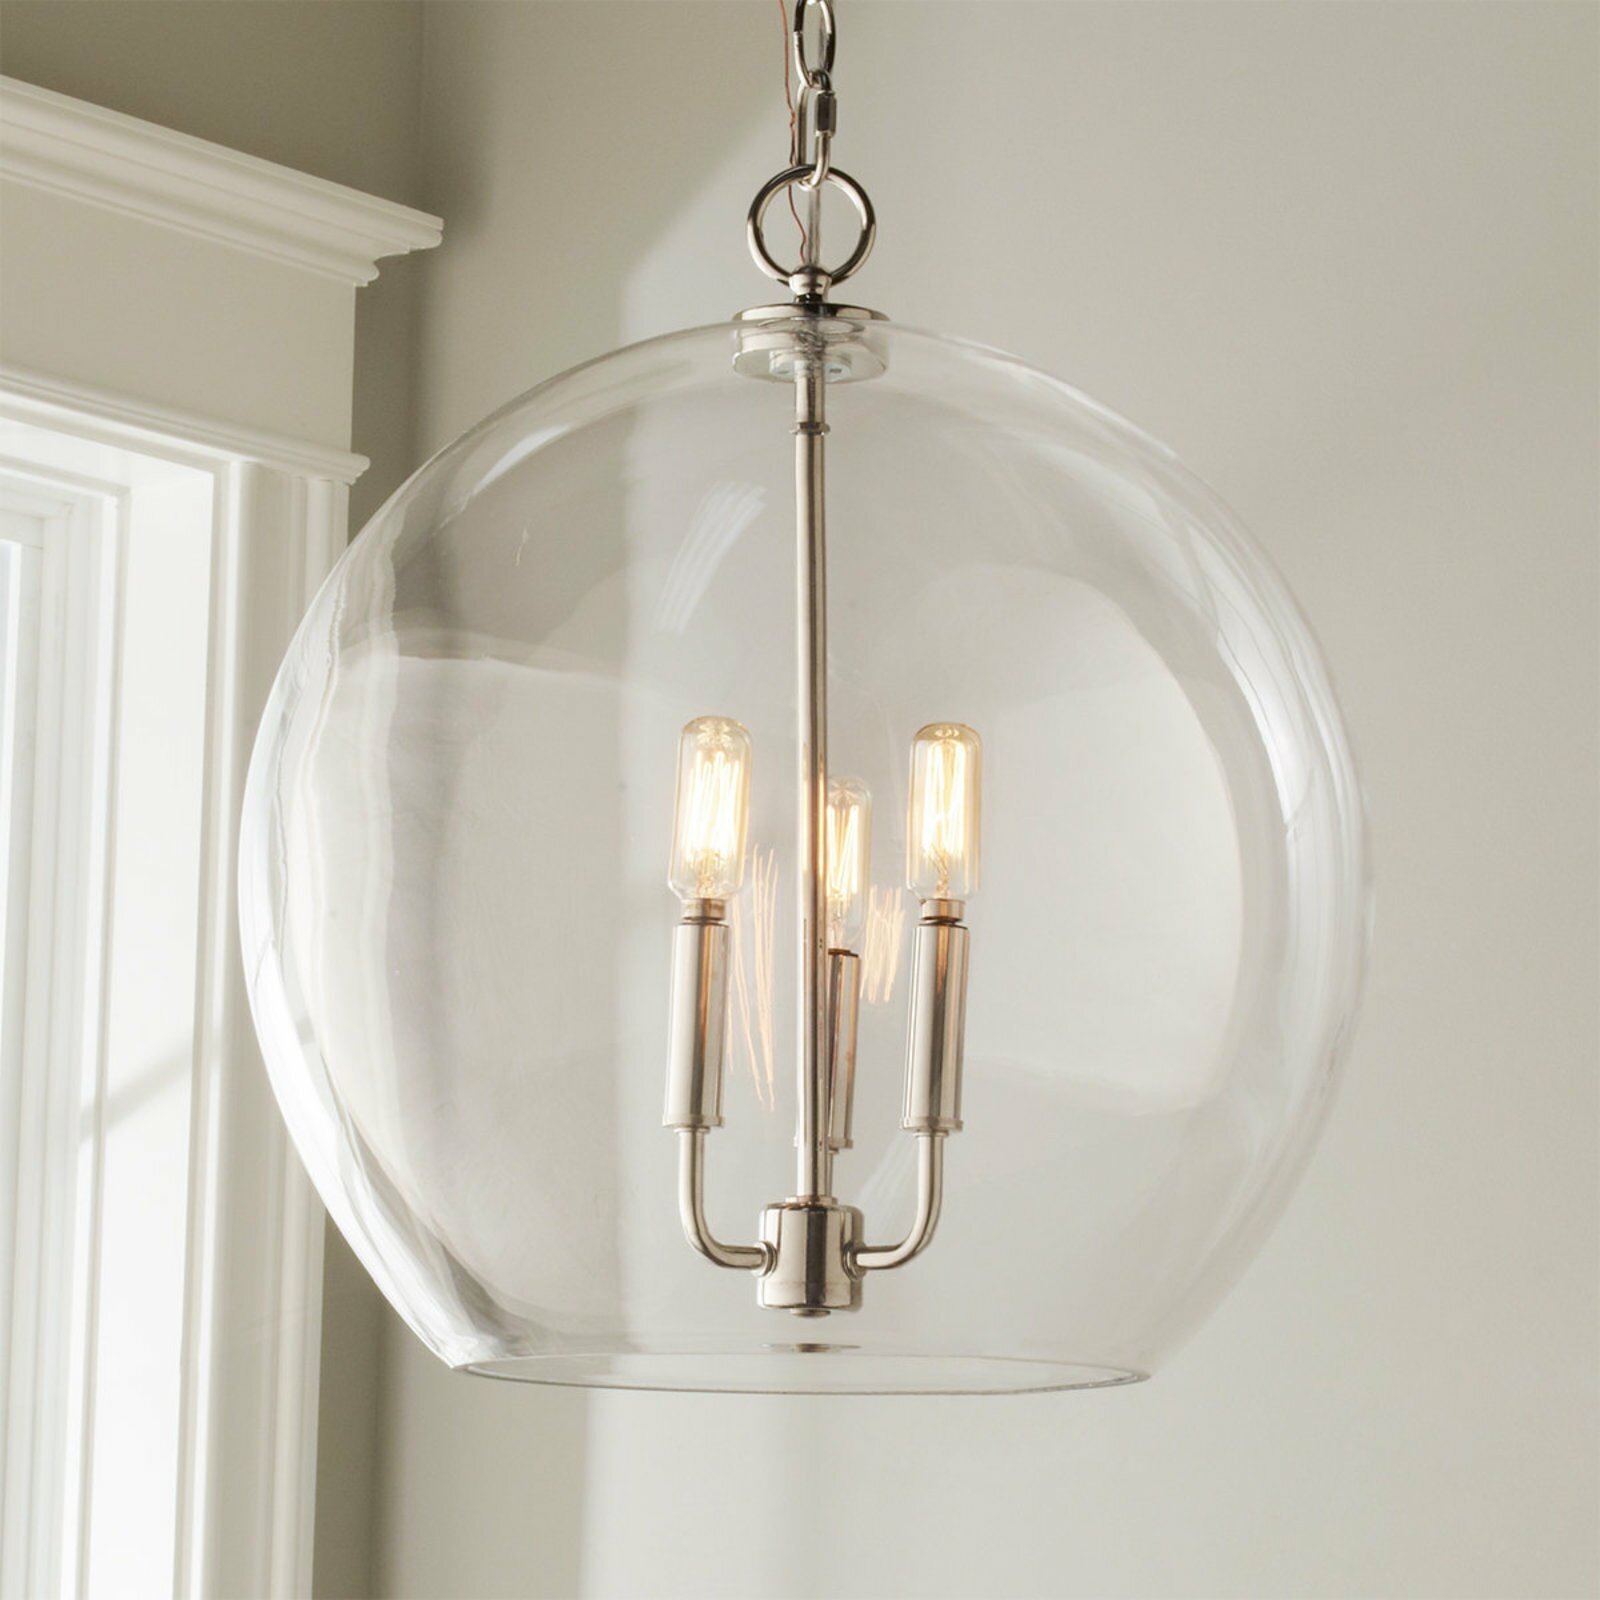 Replacement Globes for Light Fixtures | Glass Chandelier Shades | Replacement Sconce Shades